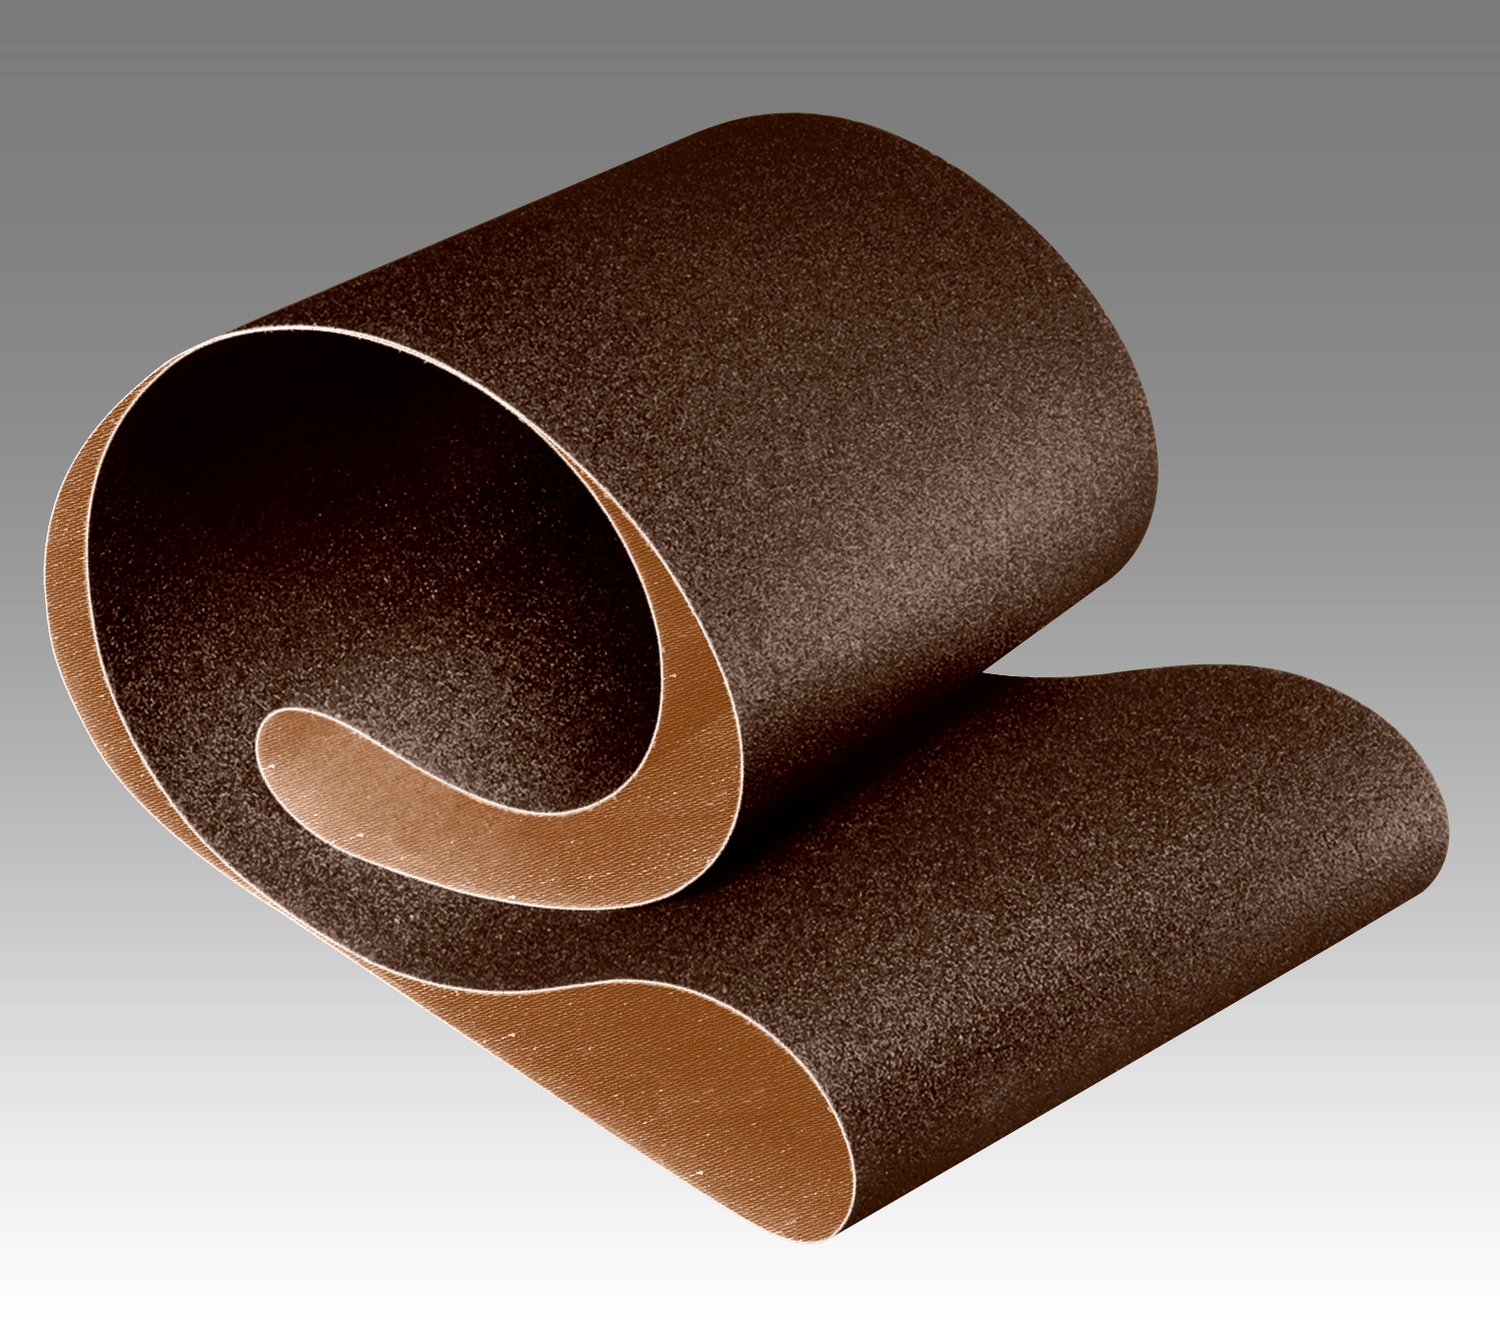 7010365318 - Scotch-Brite Surface Conditioning Film Backed Belt, SC-BF, A/O Coarse,
19 in x 60 in, 1 ea/Case